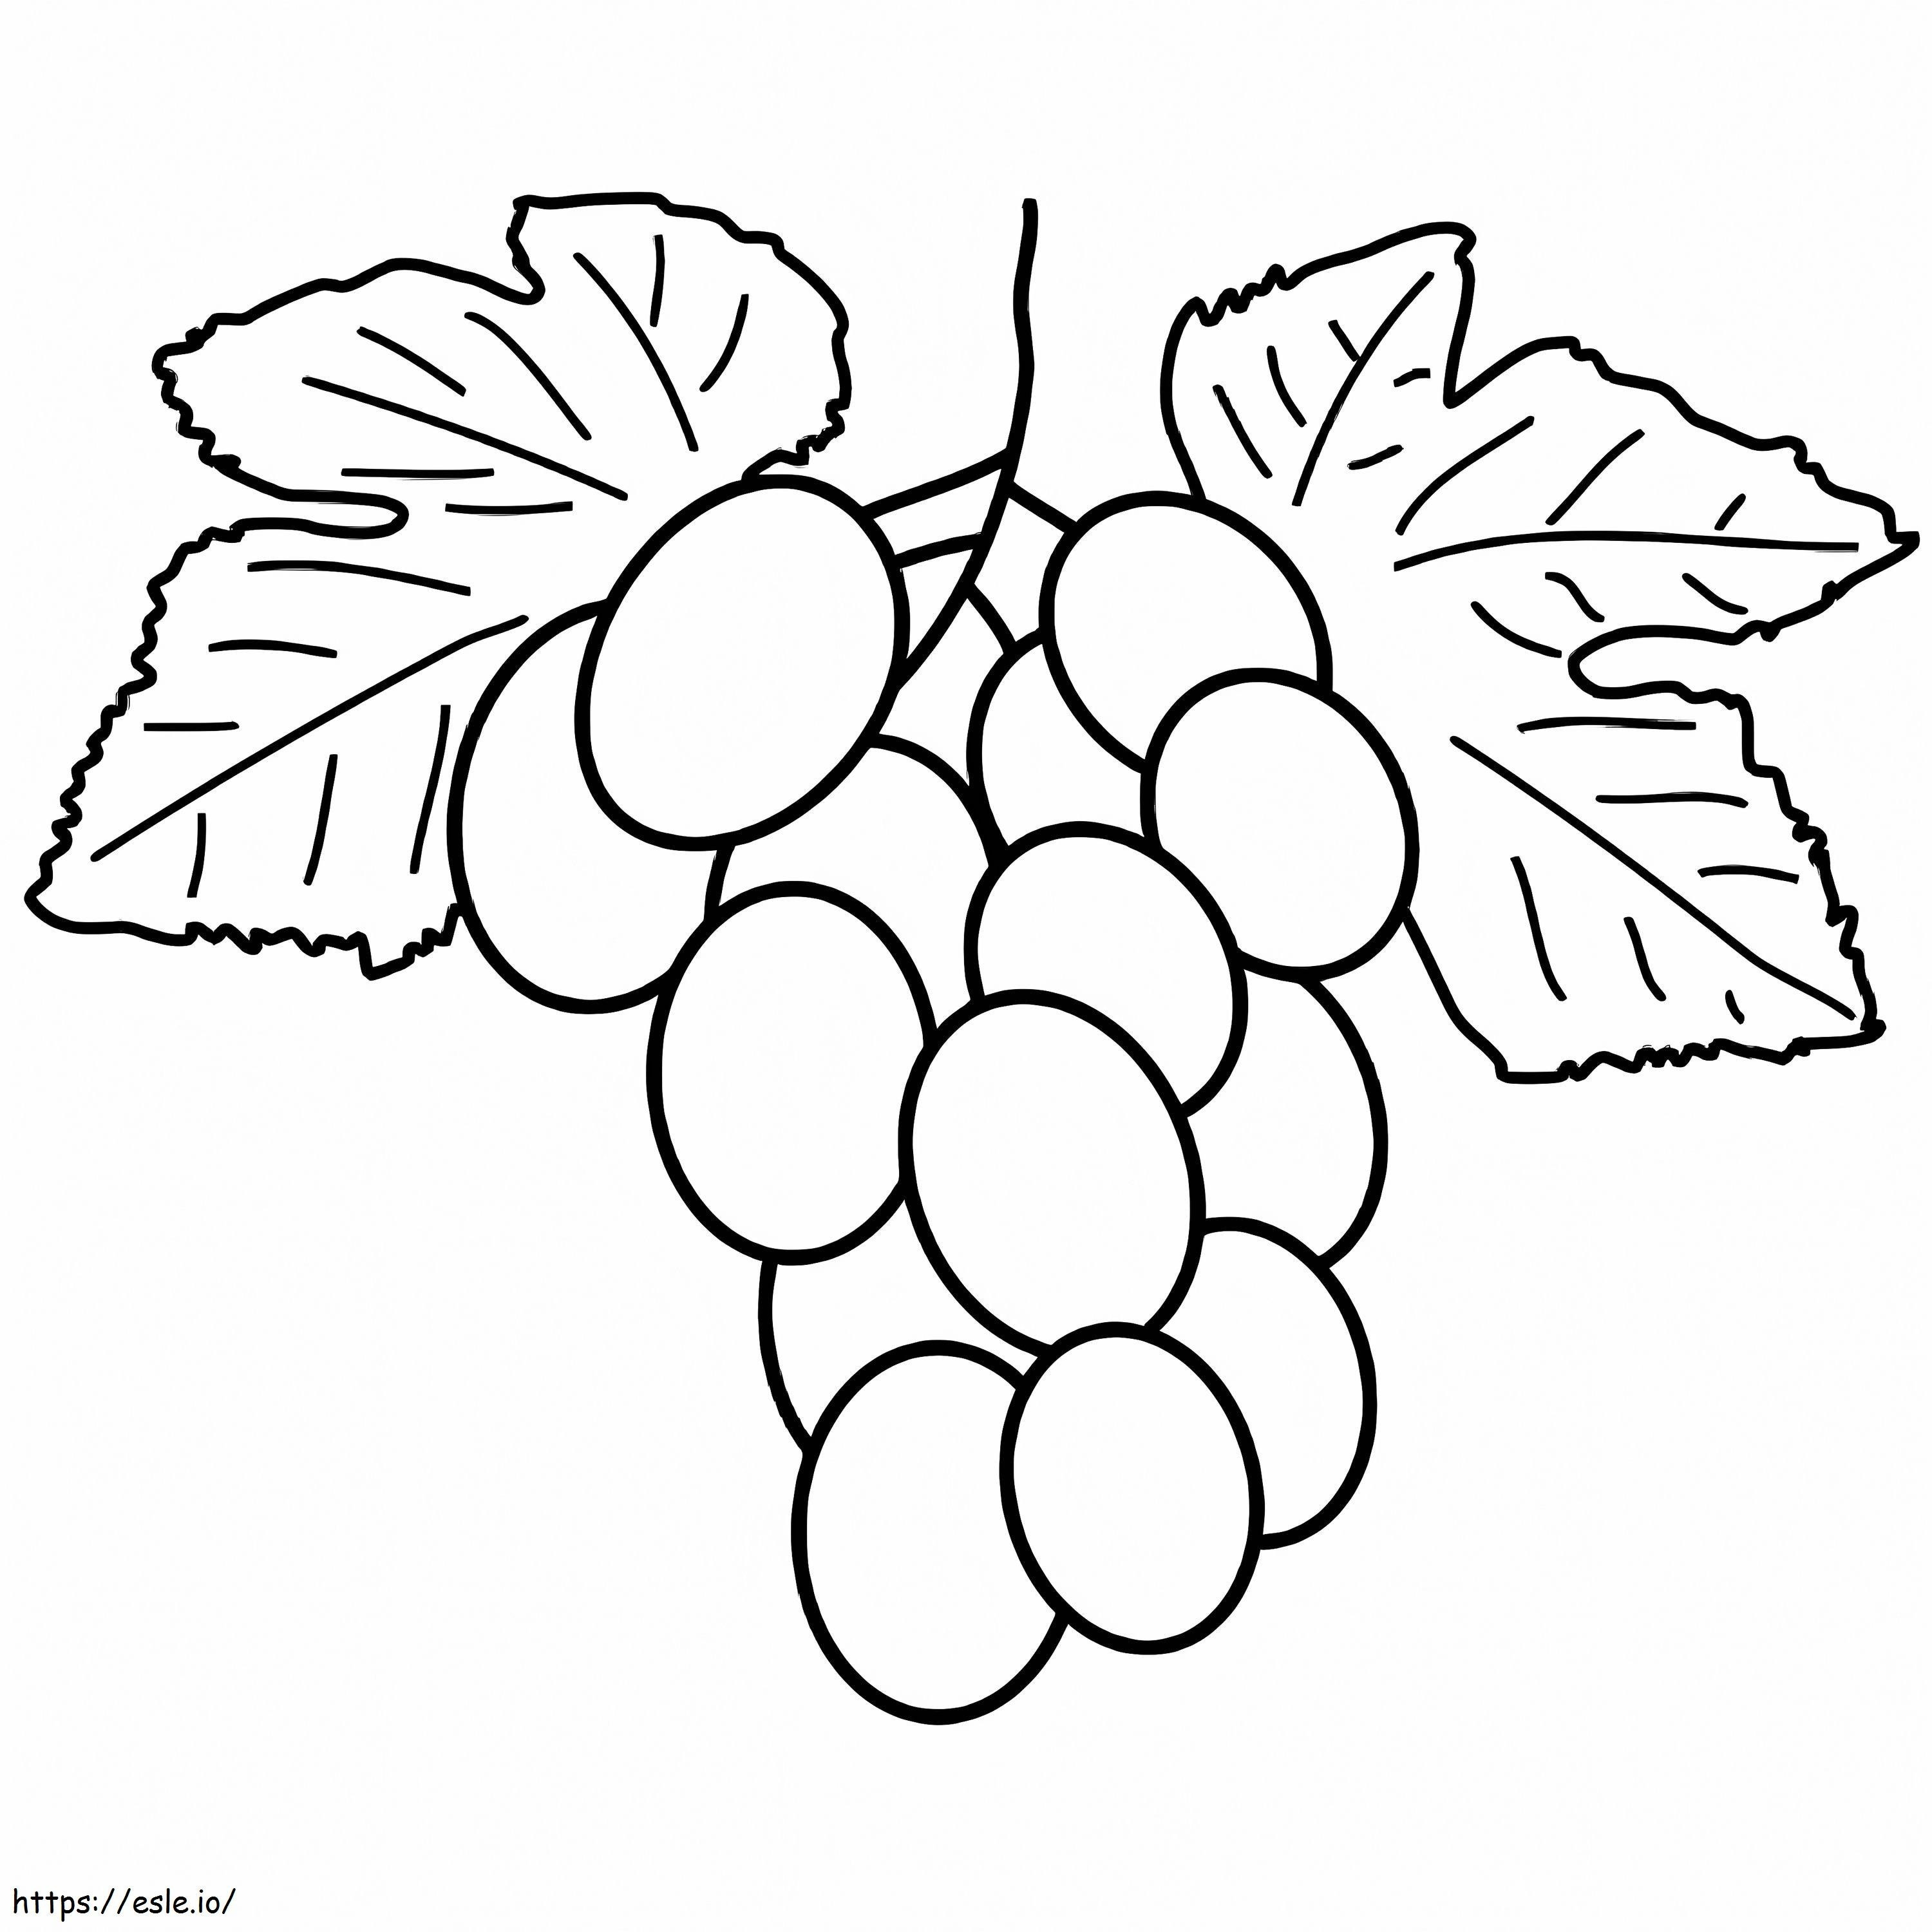 Bunch Of Grapes coloring page